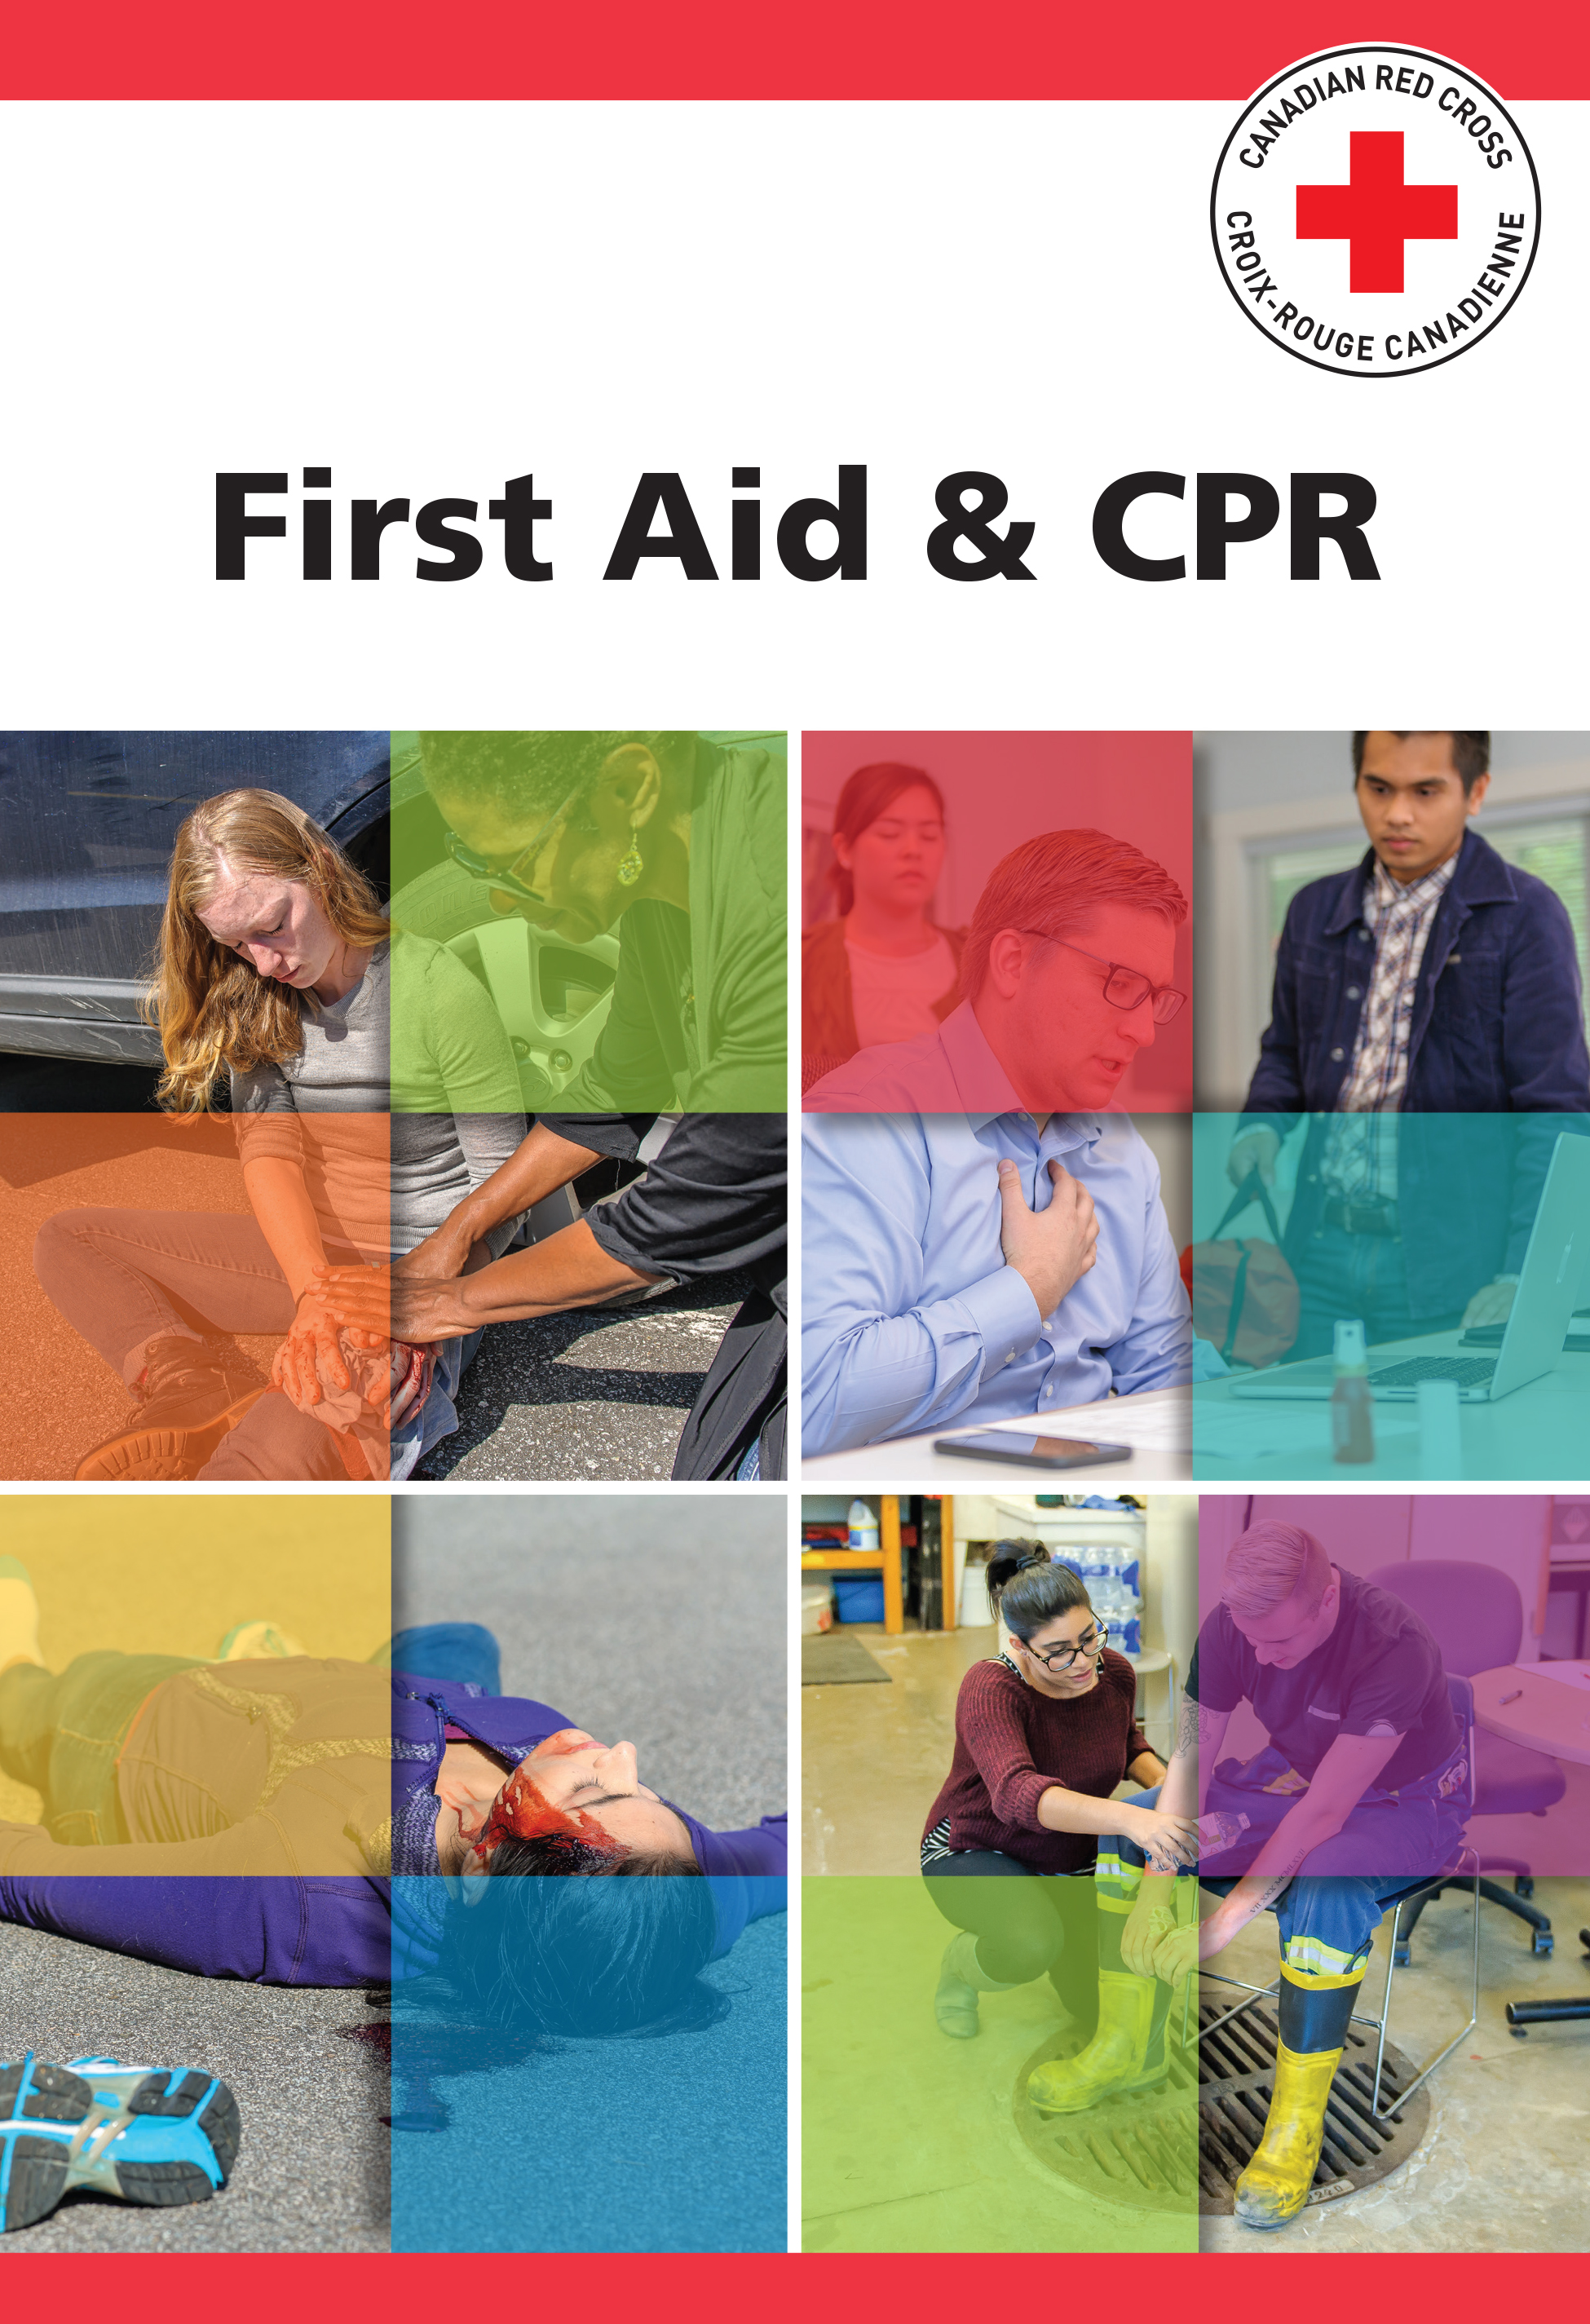 First Aid Course Materials for Marine Basic First Aid and CPR Level C (Blended) in Victoria